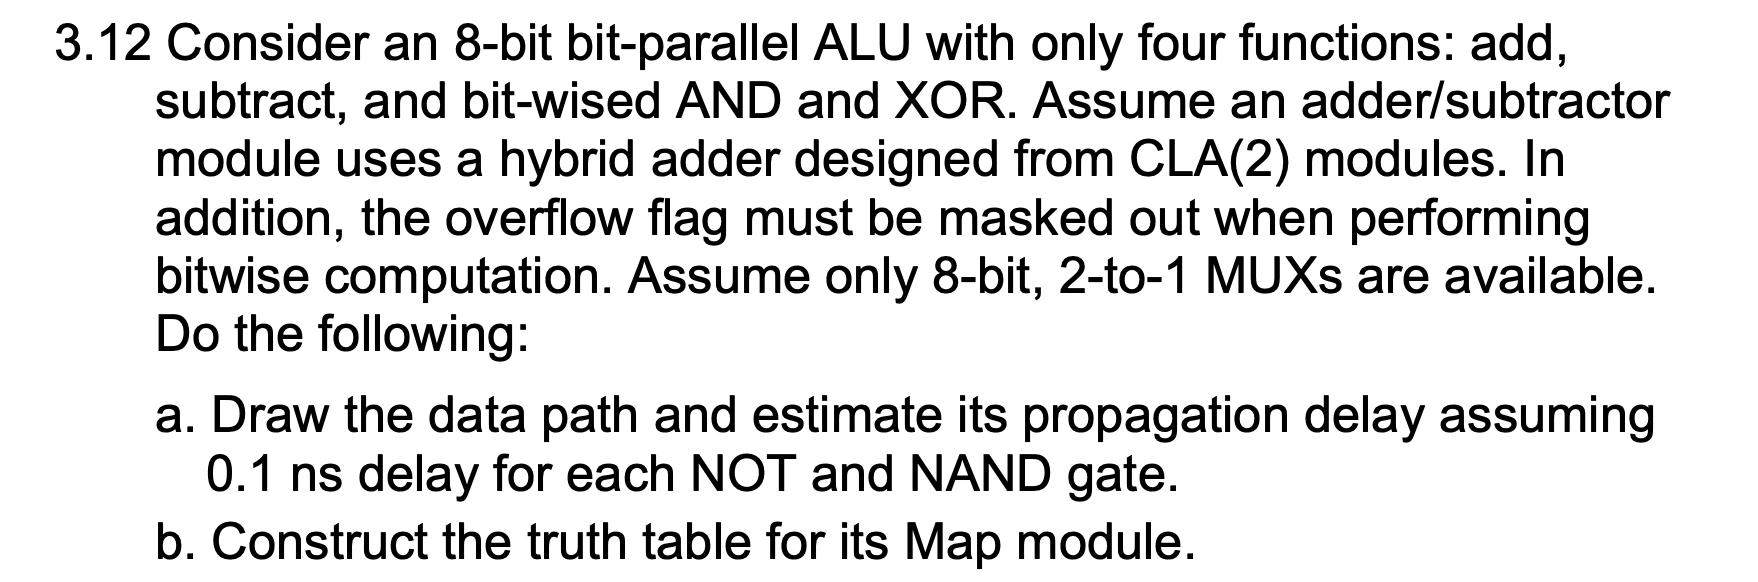 3.12 Consider an 8-bit bit-parallel ALU with only four functions: add, subtract, and bit-wised AND and XOR.